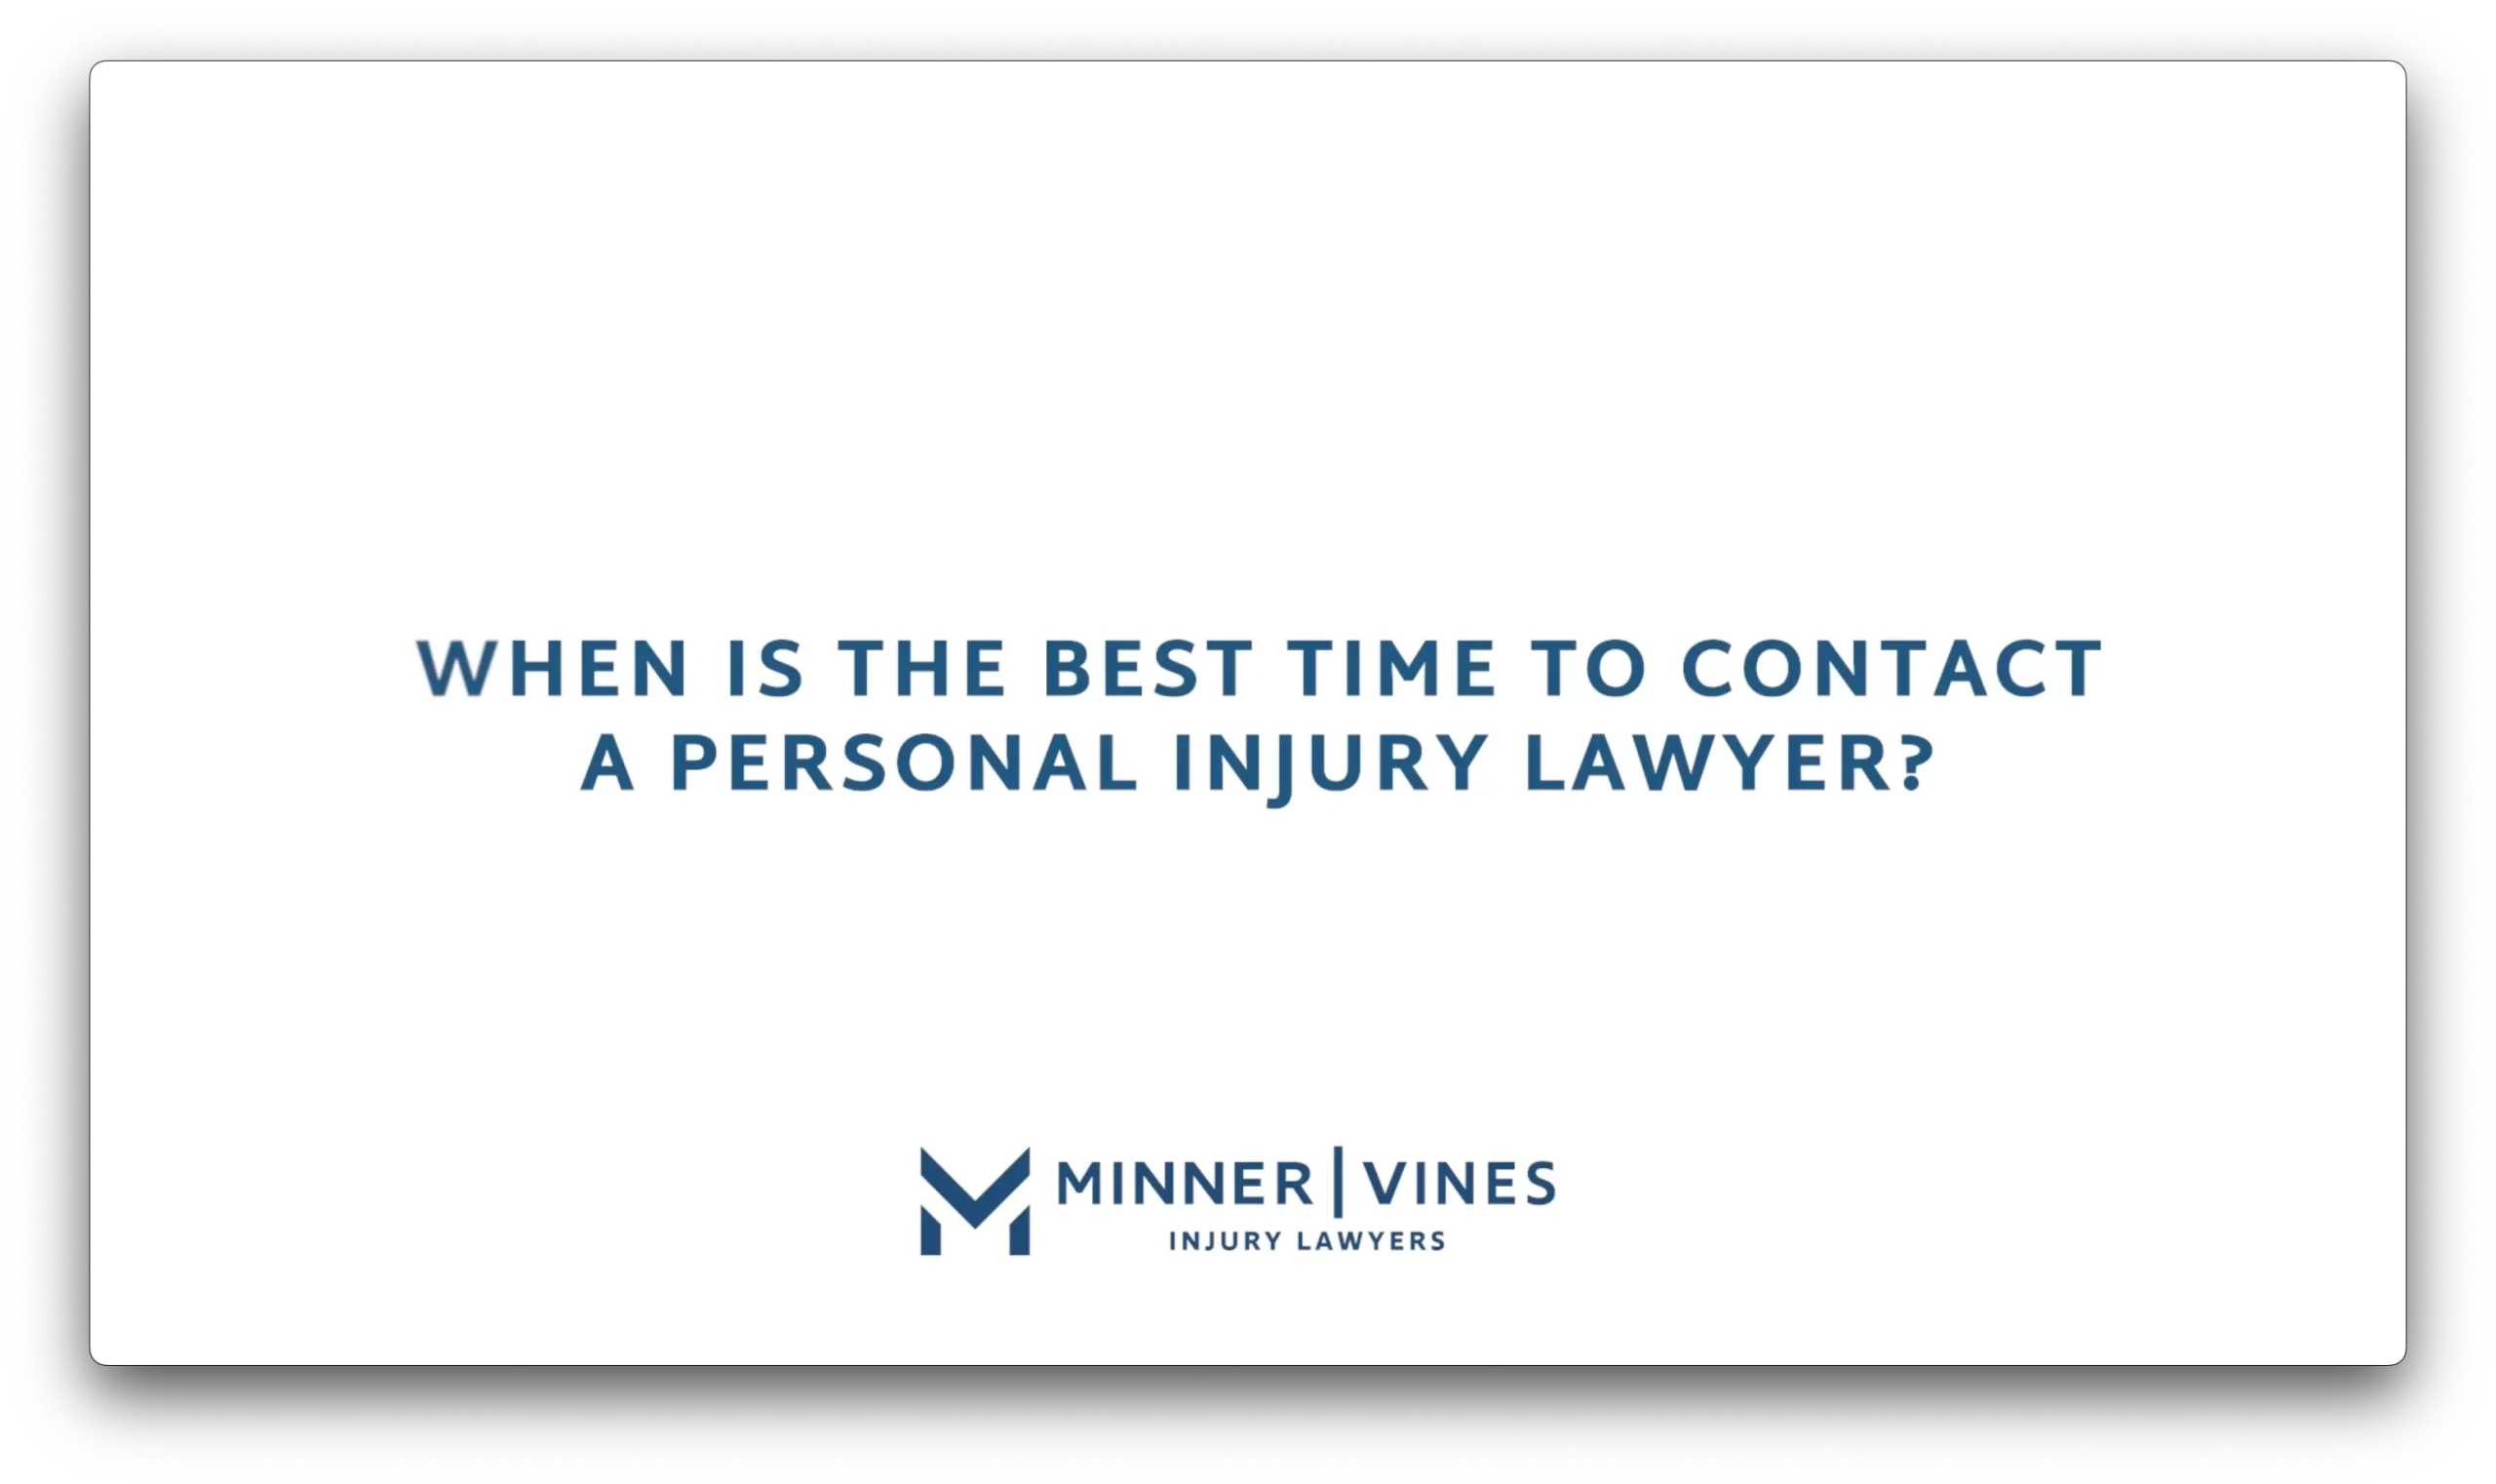 When is the best time to contact a personal injury lawyer?